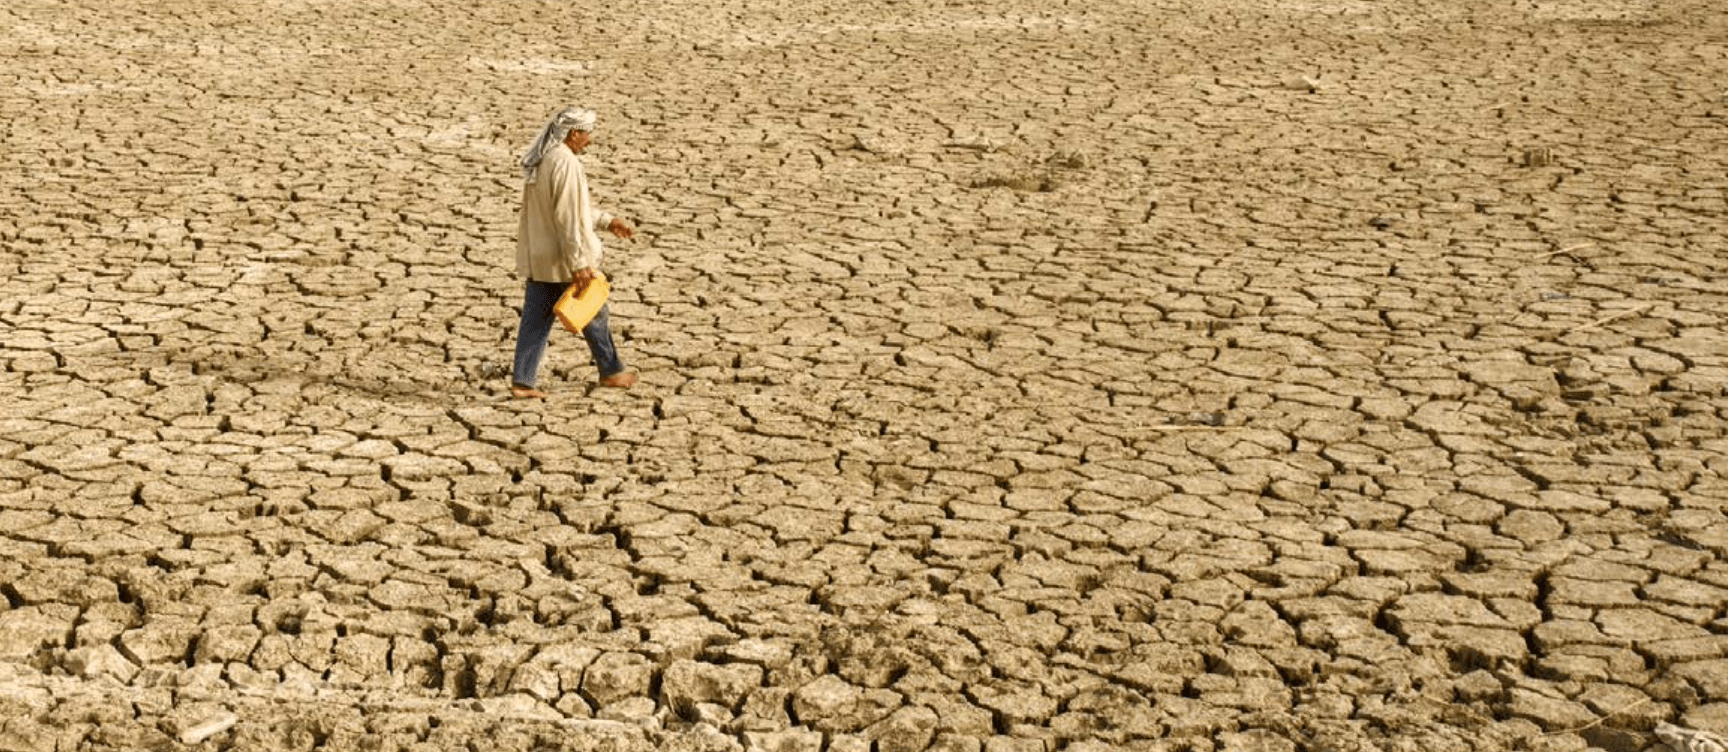 Featured image for “Silent Crisis: New report reveals urgent information needs on frontlines of climate crisis”